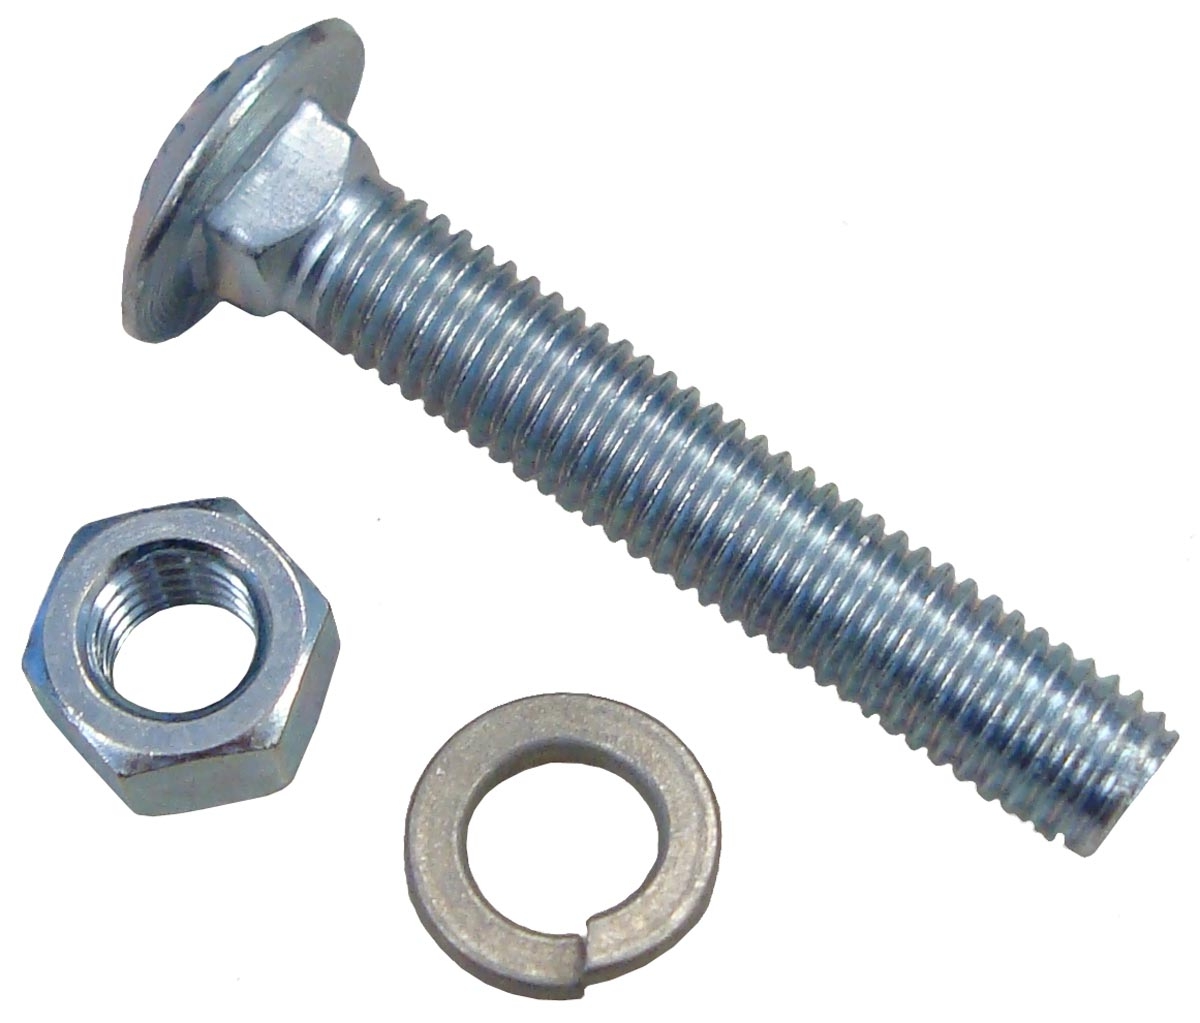 REAR WHEEL WEIGHT NUT & WASHER CARRIAGE BOLT KIT (3 PCS)